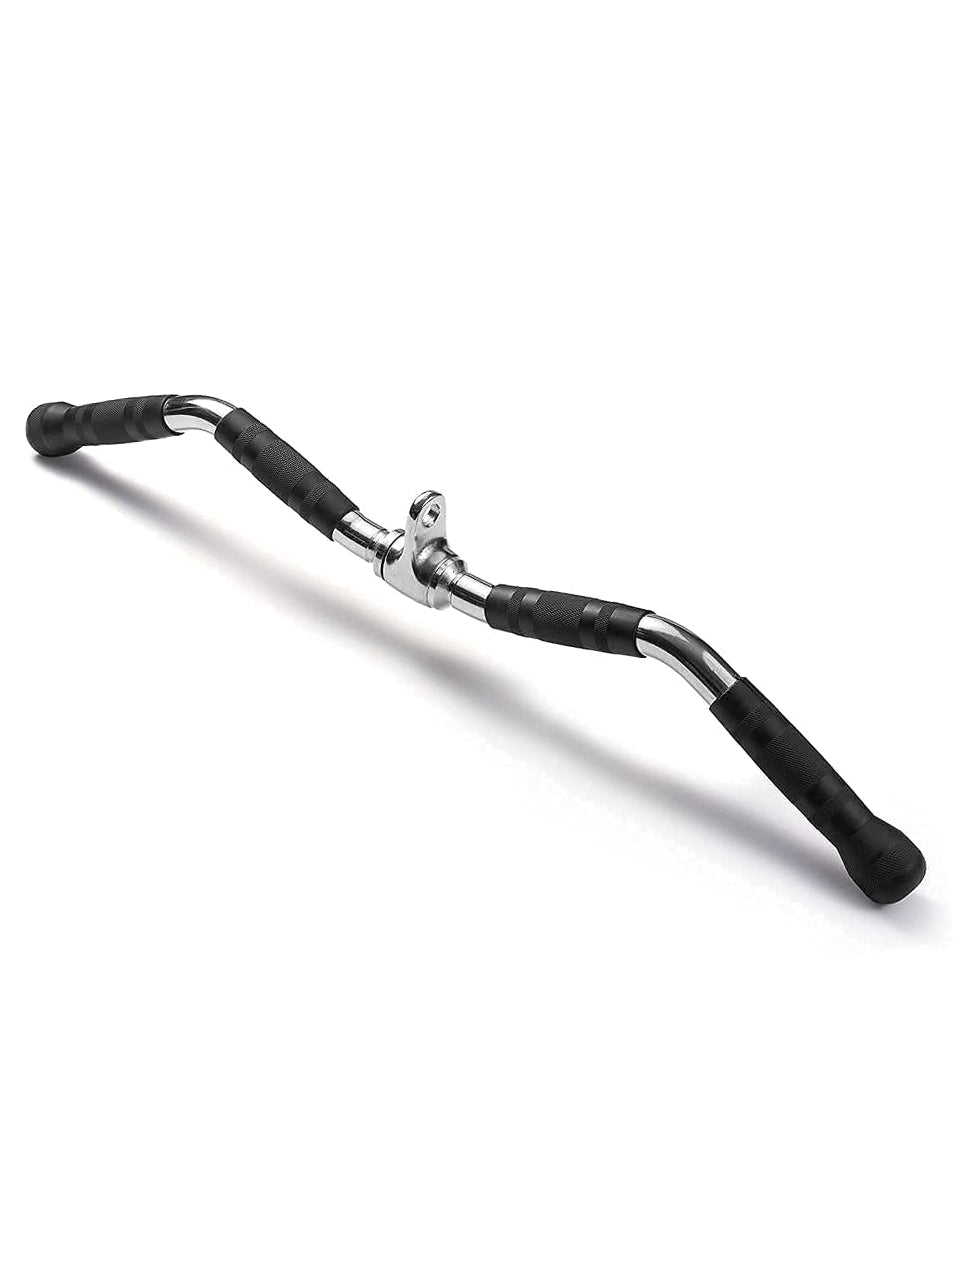 1441 Fitness Lat Attachment - Curl Bar Rotating with Rubber Grips